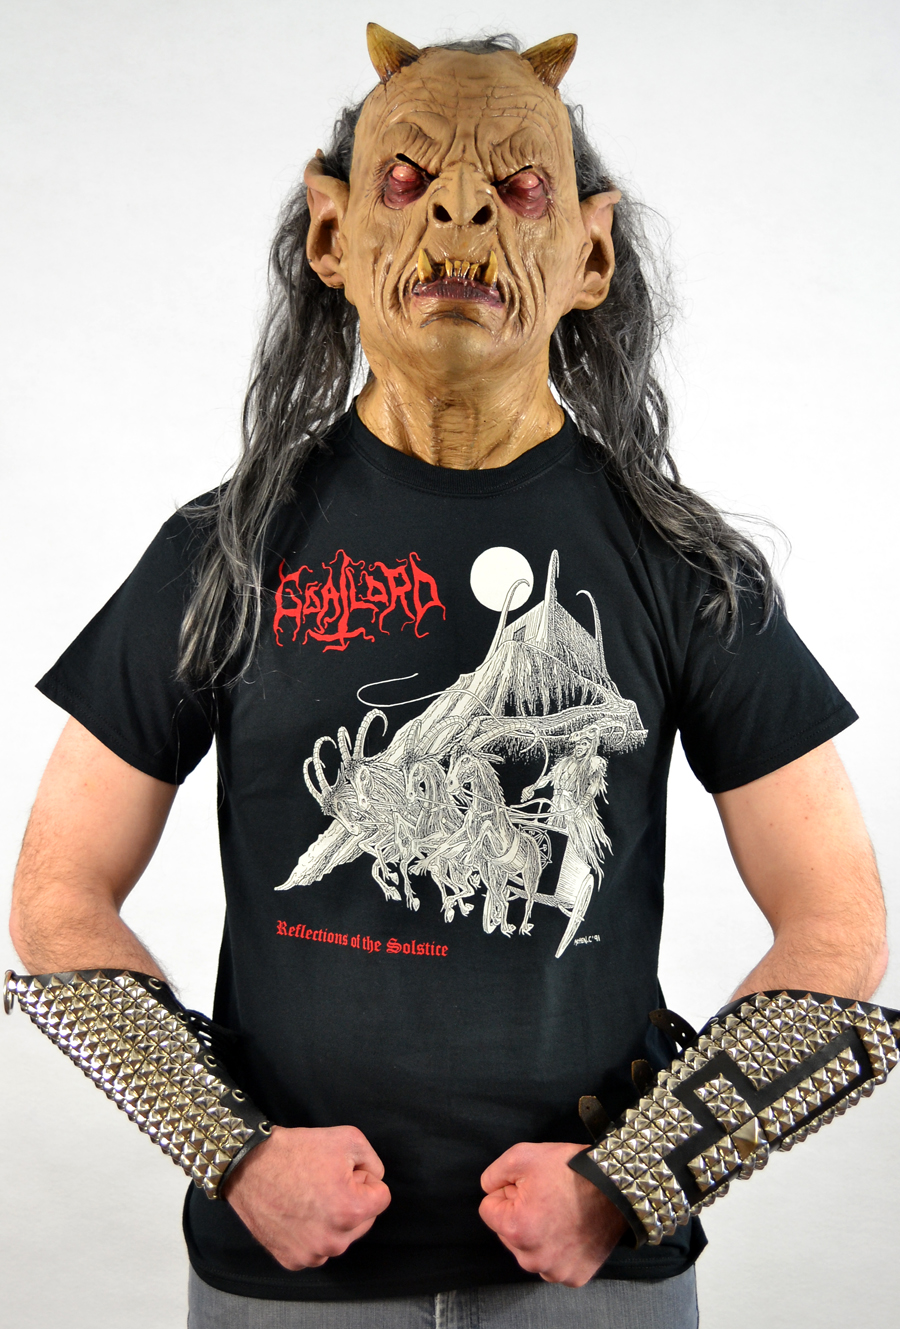 GOATLORD - Reflections Of The Solstice (T-Shirt)